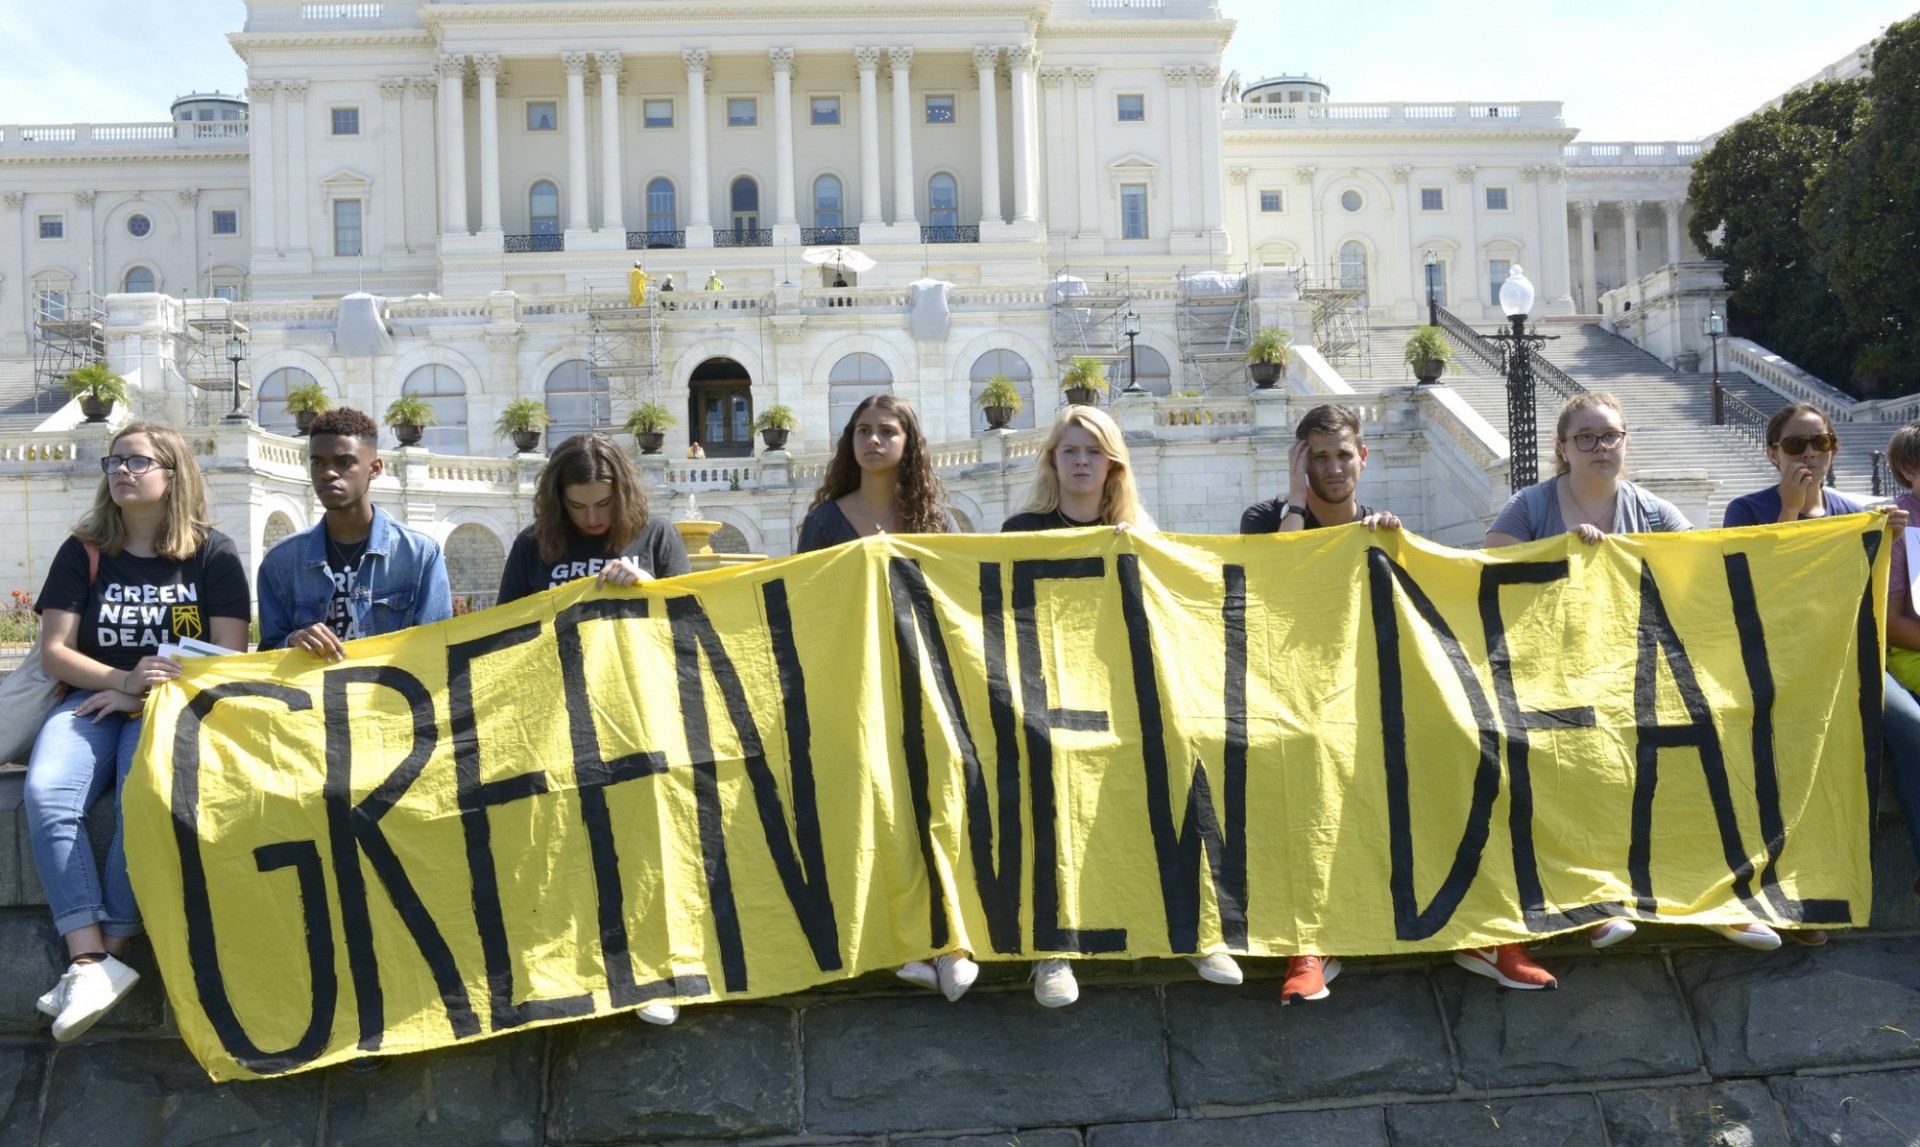 Eight youth hold a large yellow banner that read Gree New Deal in front of the Capitol Building